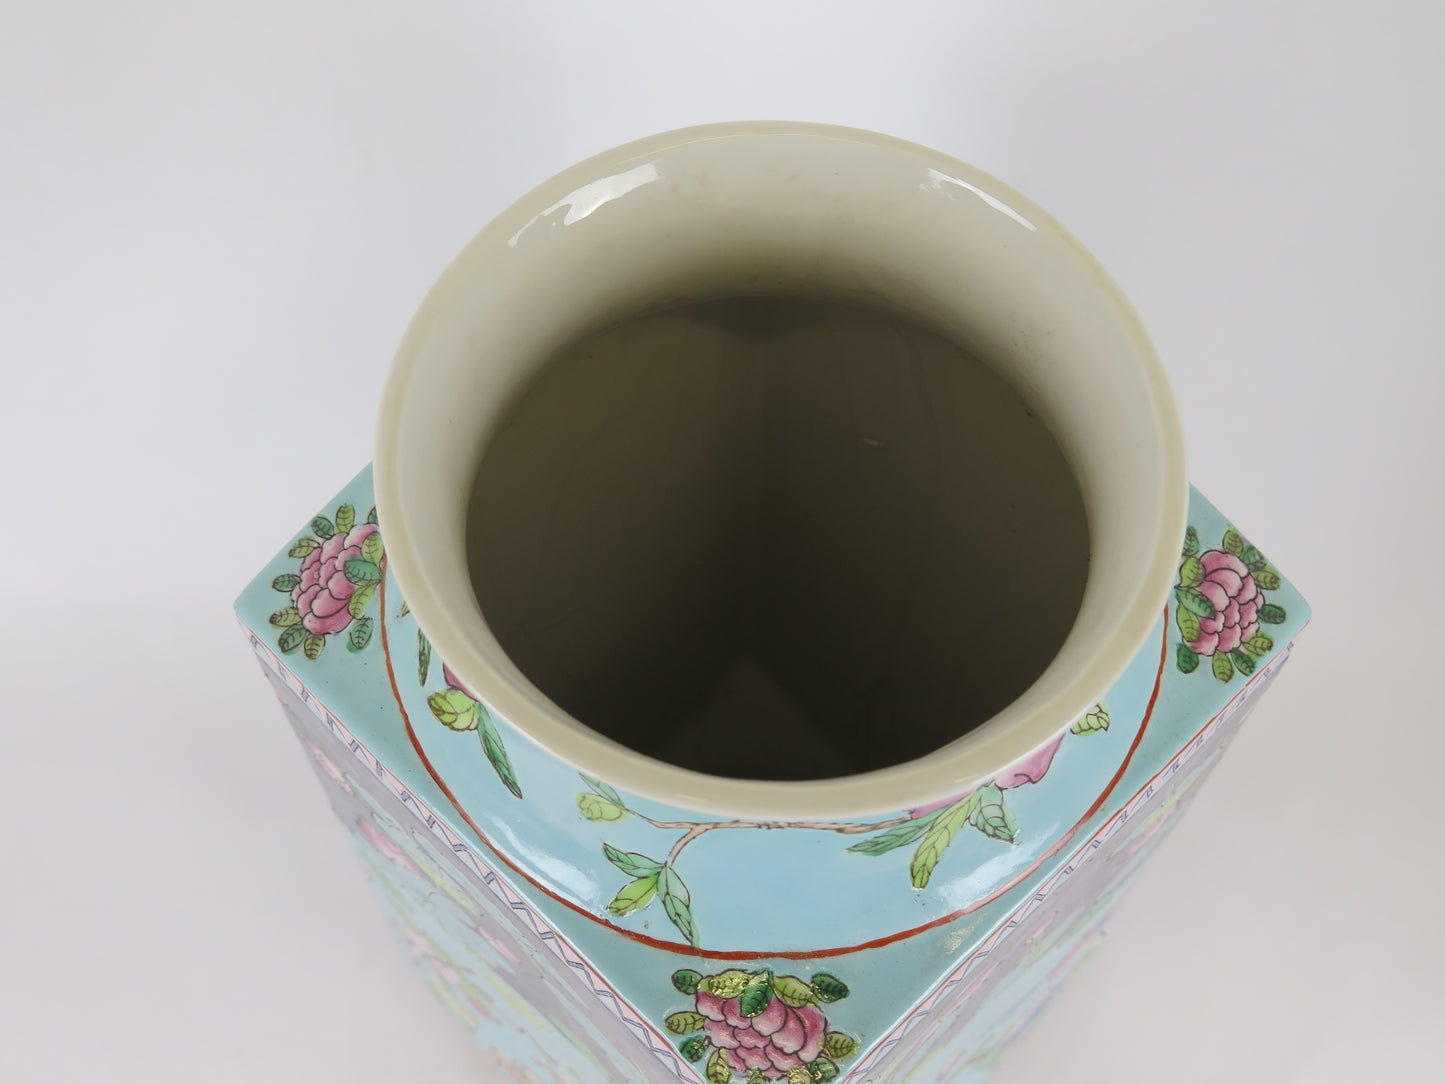 Collectible vintage Chinese ceramic vase Original China high quality CM8 a